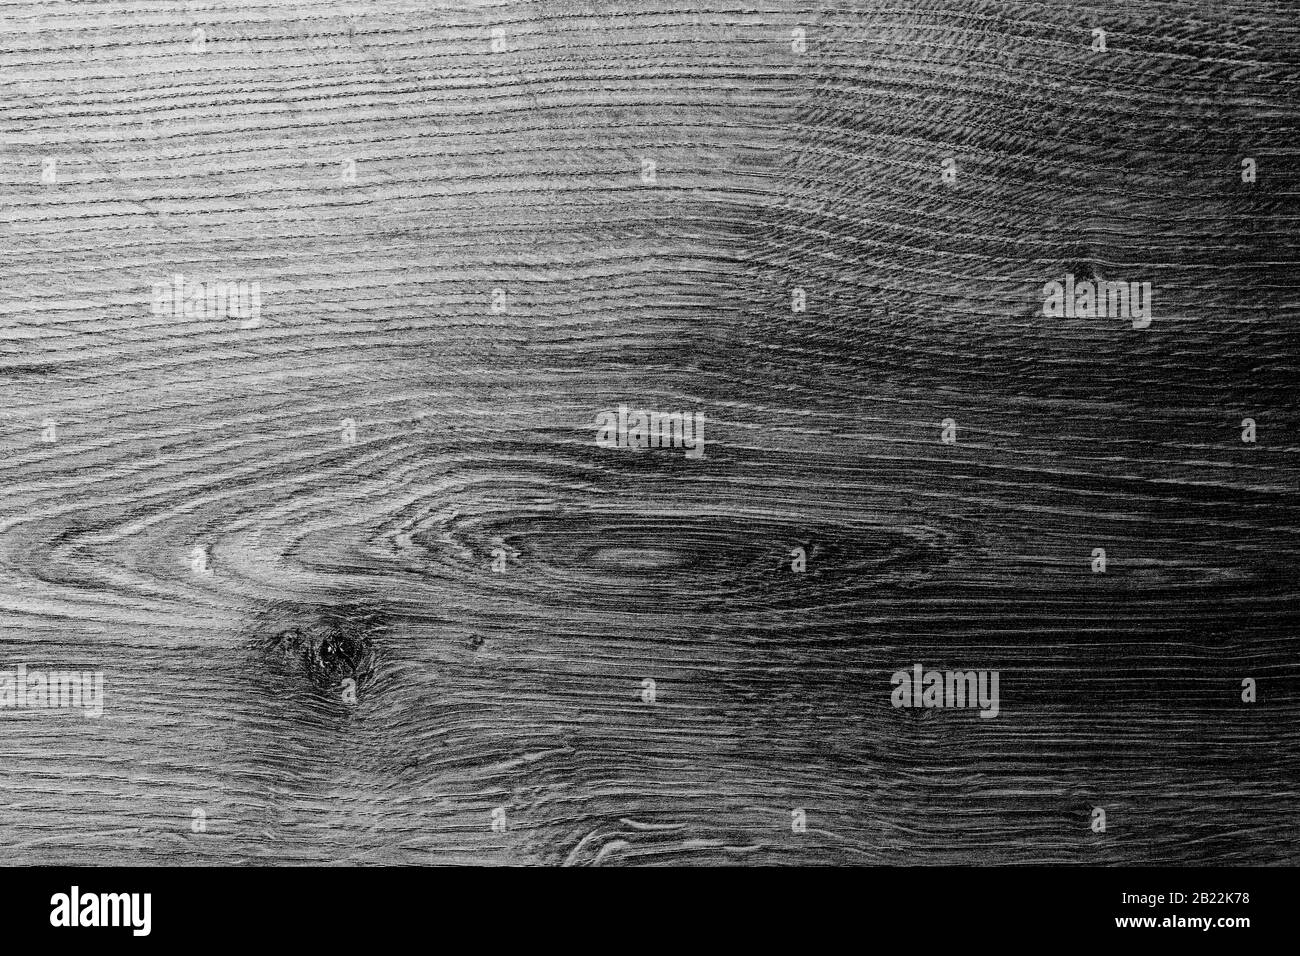 Seamless background of black and white wood grain Stock Photo